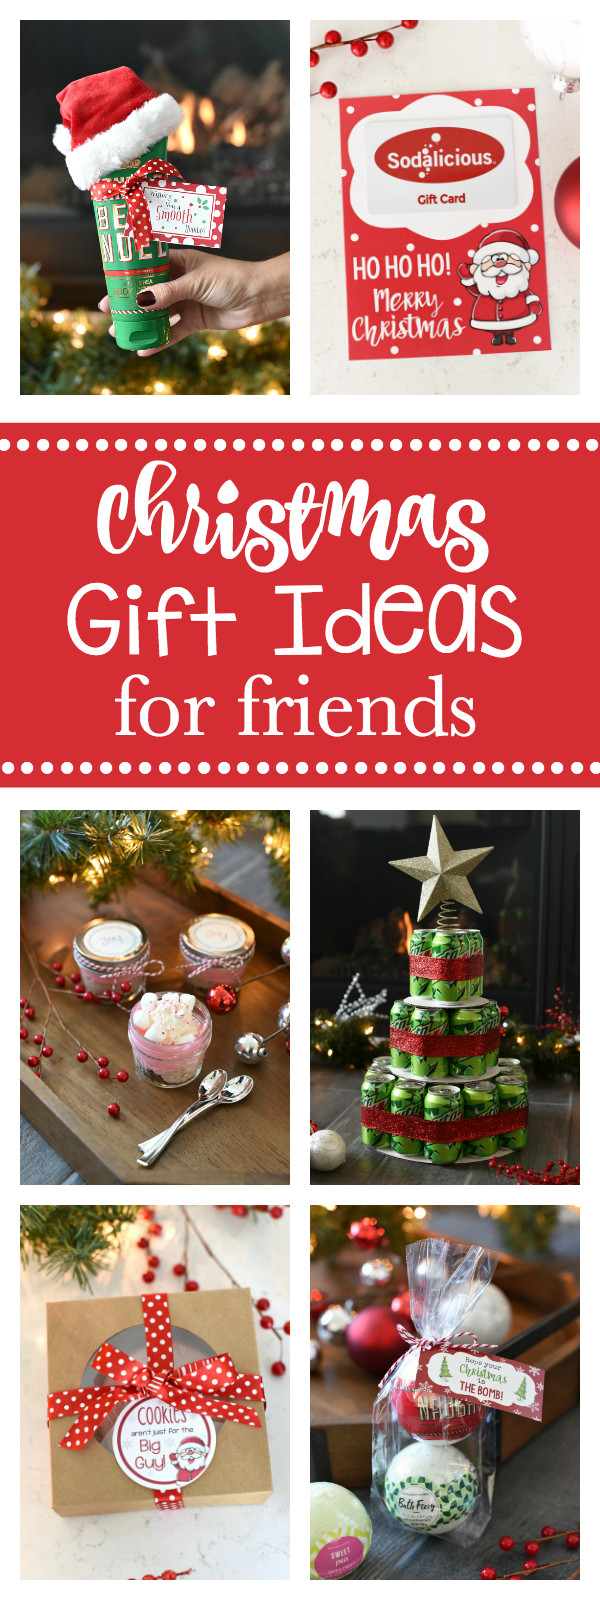 Funny Christmas Gifts For Friends
 Good Gifts for Friends at Christmas – Fun Squared